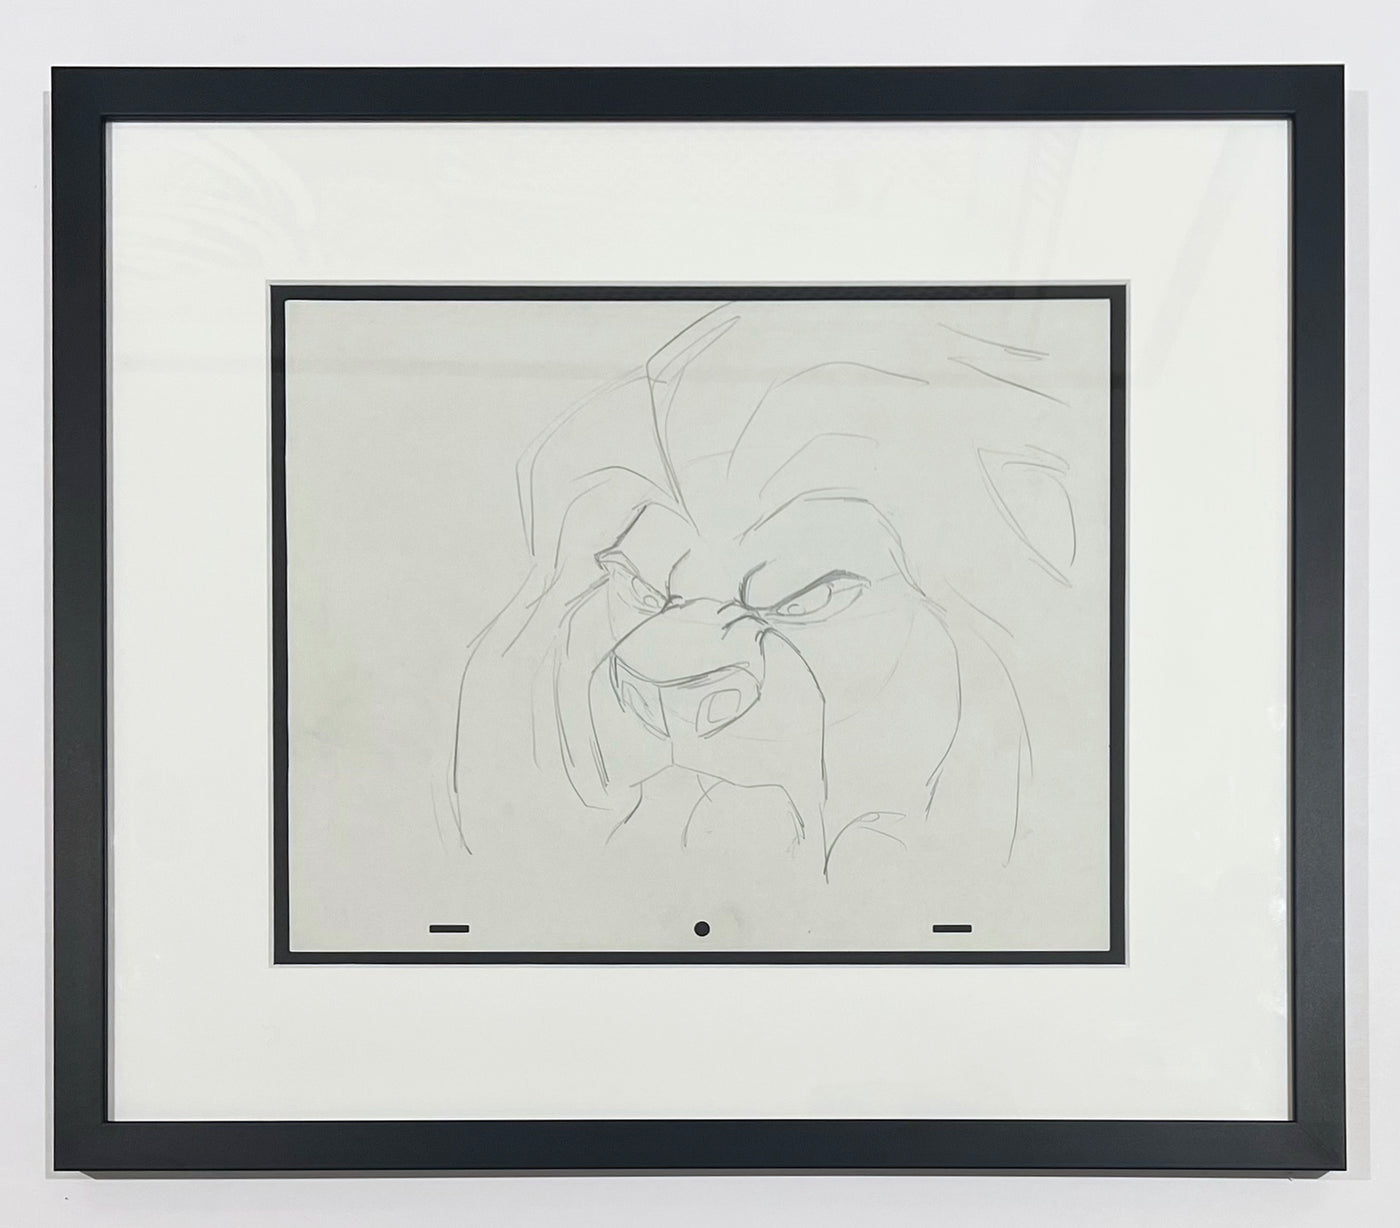 Original Walt Disney Production Drawing from The Lion King featuring Mufasa